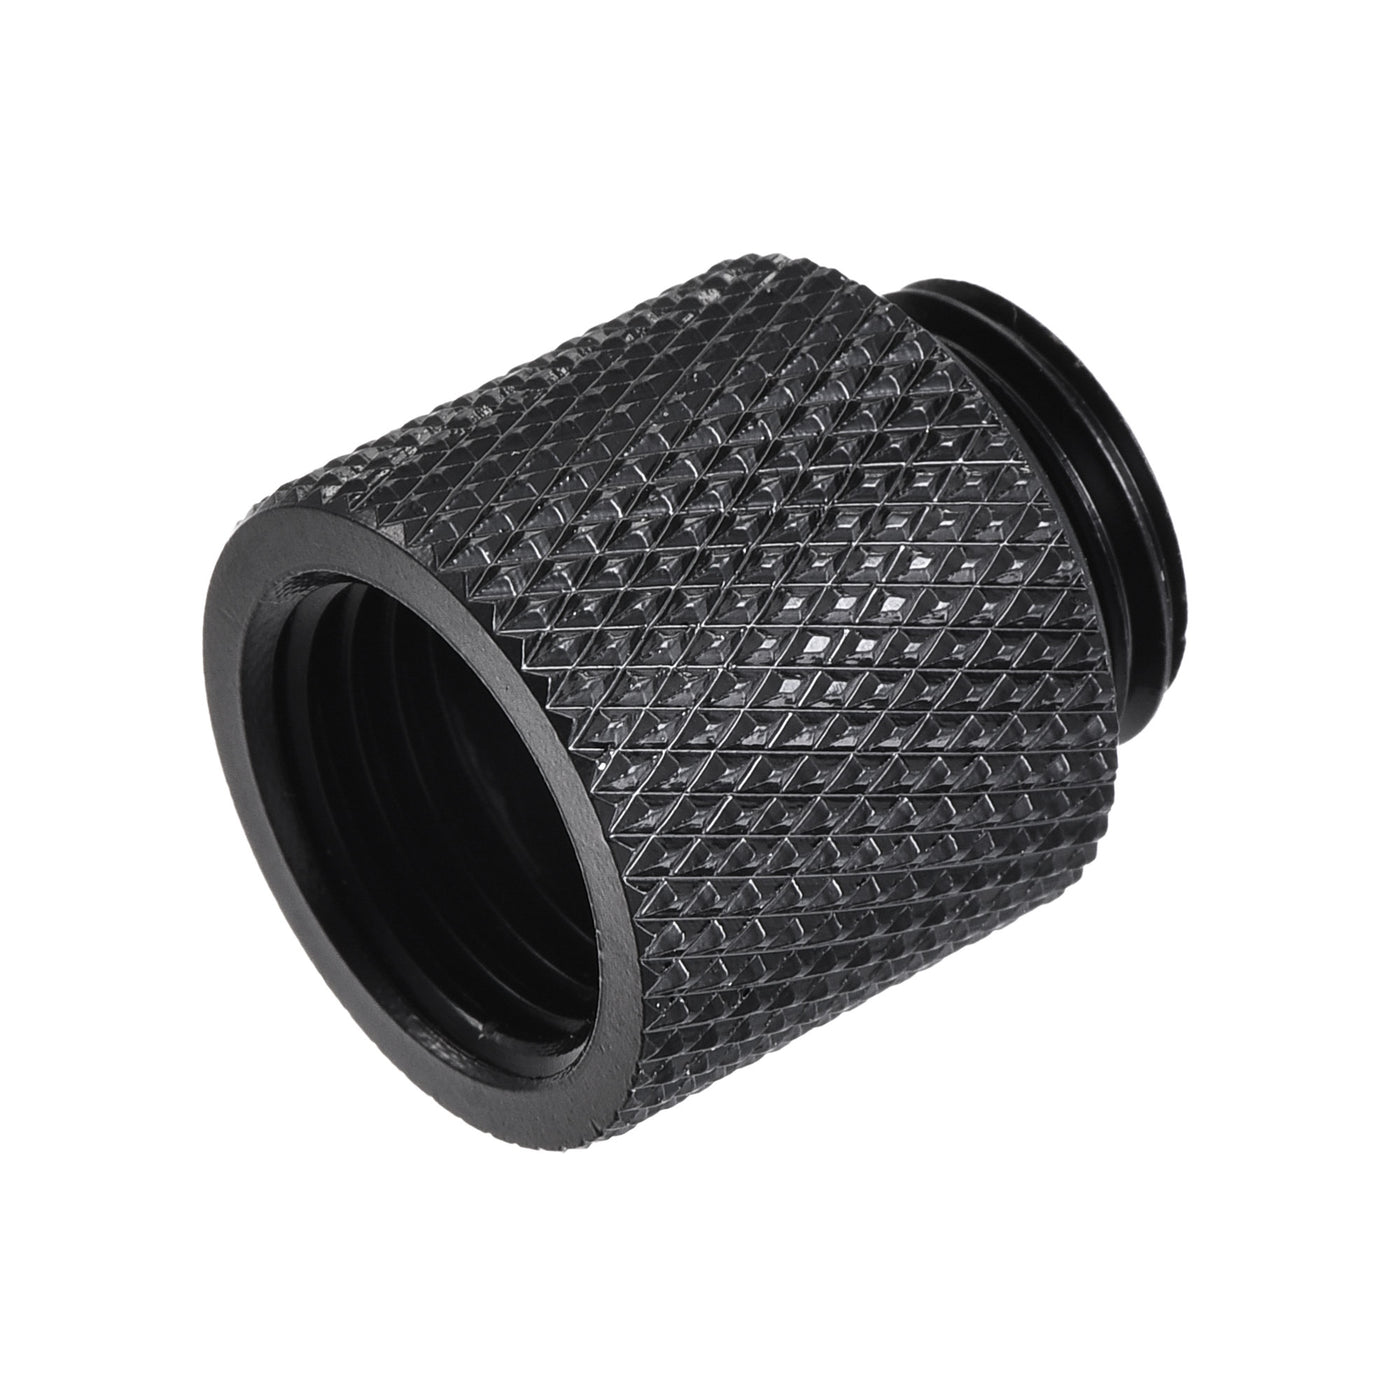 uxcell Uxcell Male to Female Extender Fitting G1/4 x 15mm for Water Cooling System Black